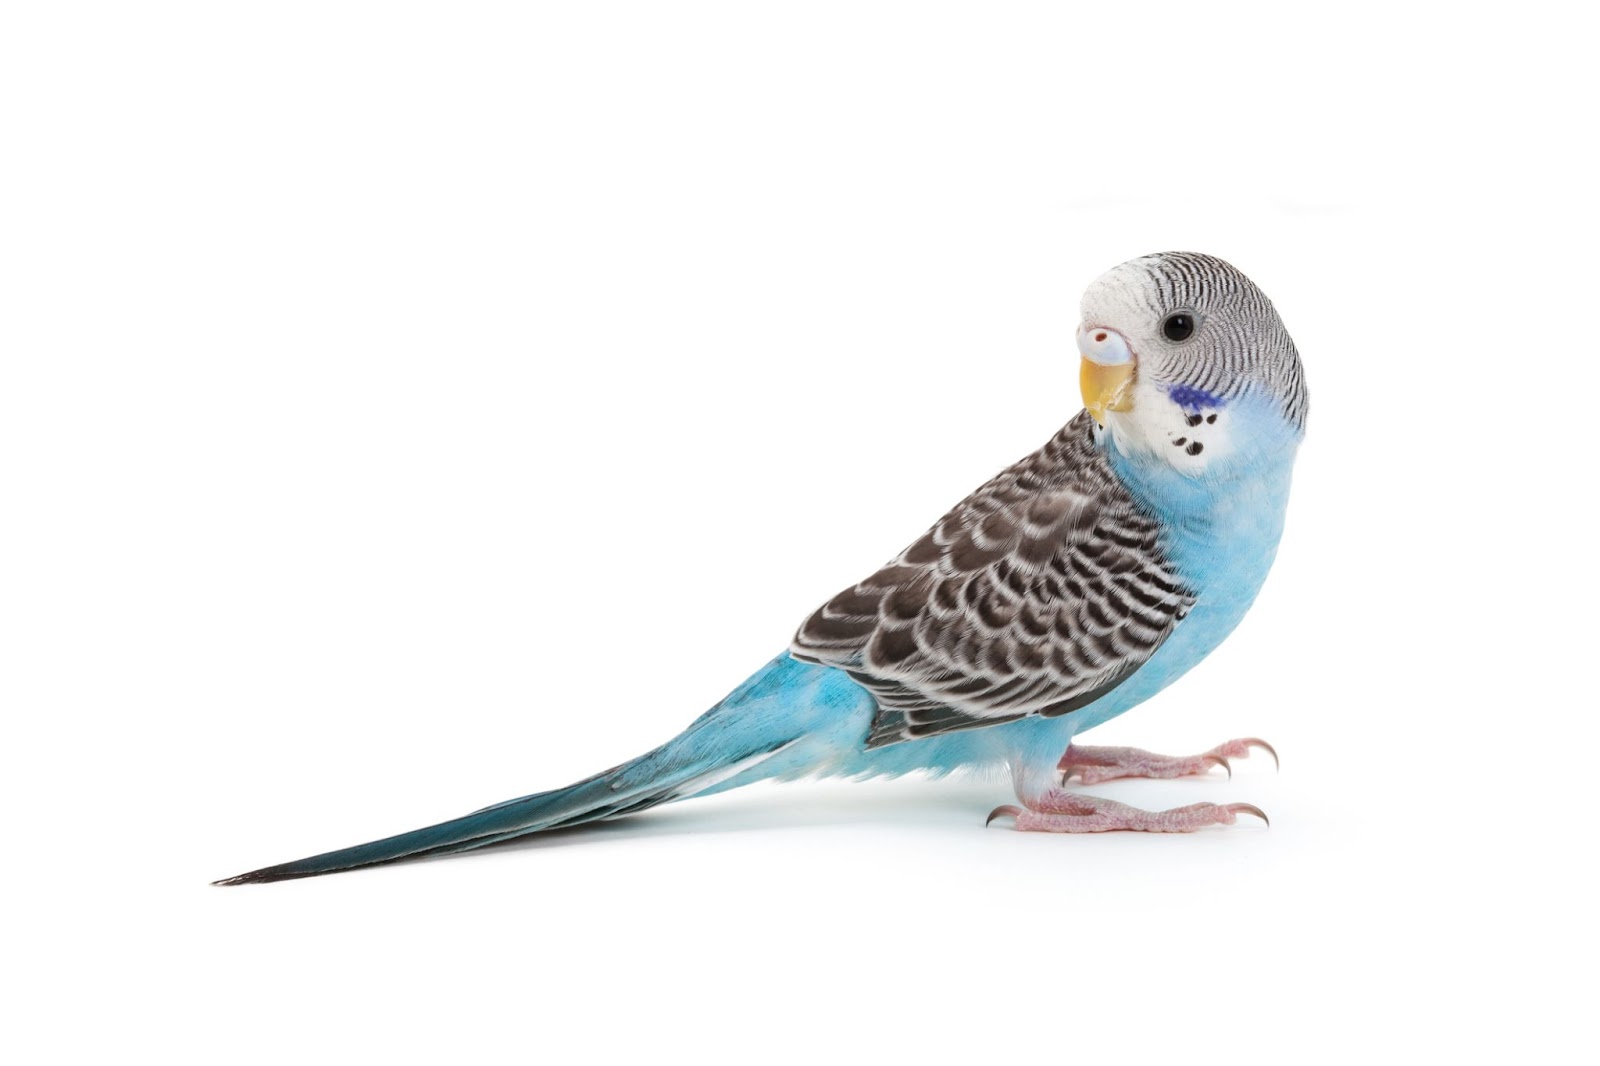 Budgie Molting: Everything You Need To Know explained at Petrestart.com.